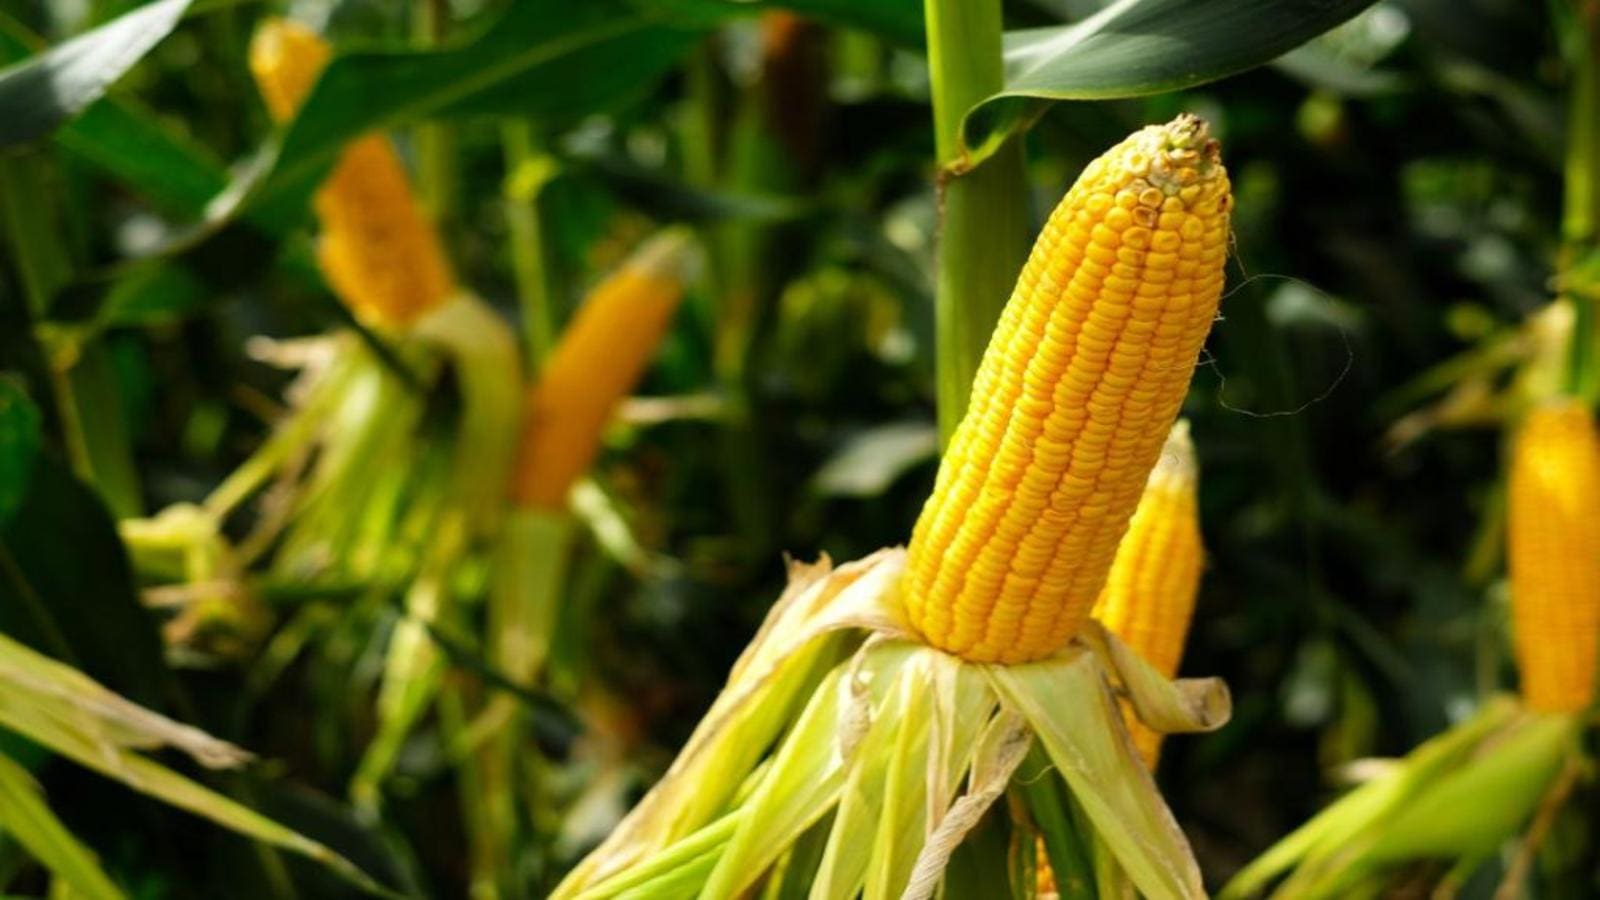 Zambia to register 25% decline in maize production in 2022/2023, still remain food secure